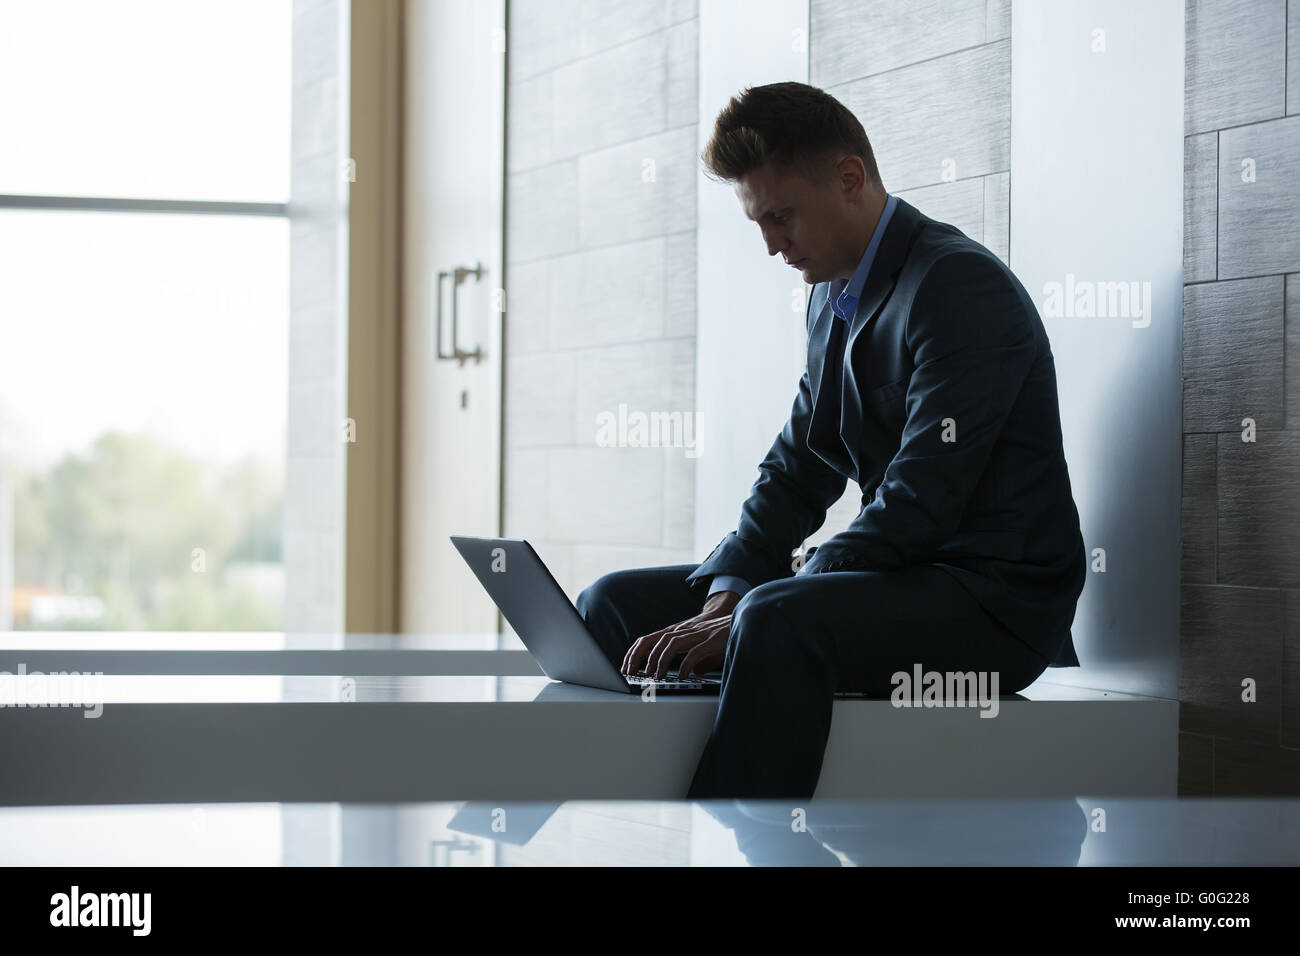 Business man sitting alone on a bench with laptop Stock Photo